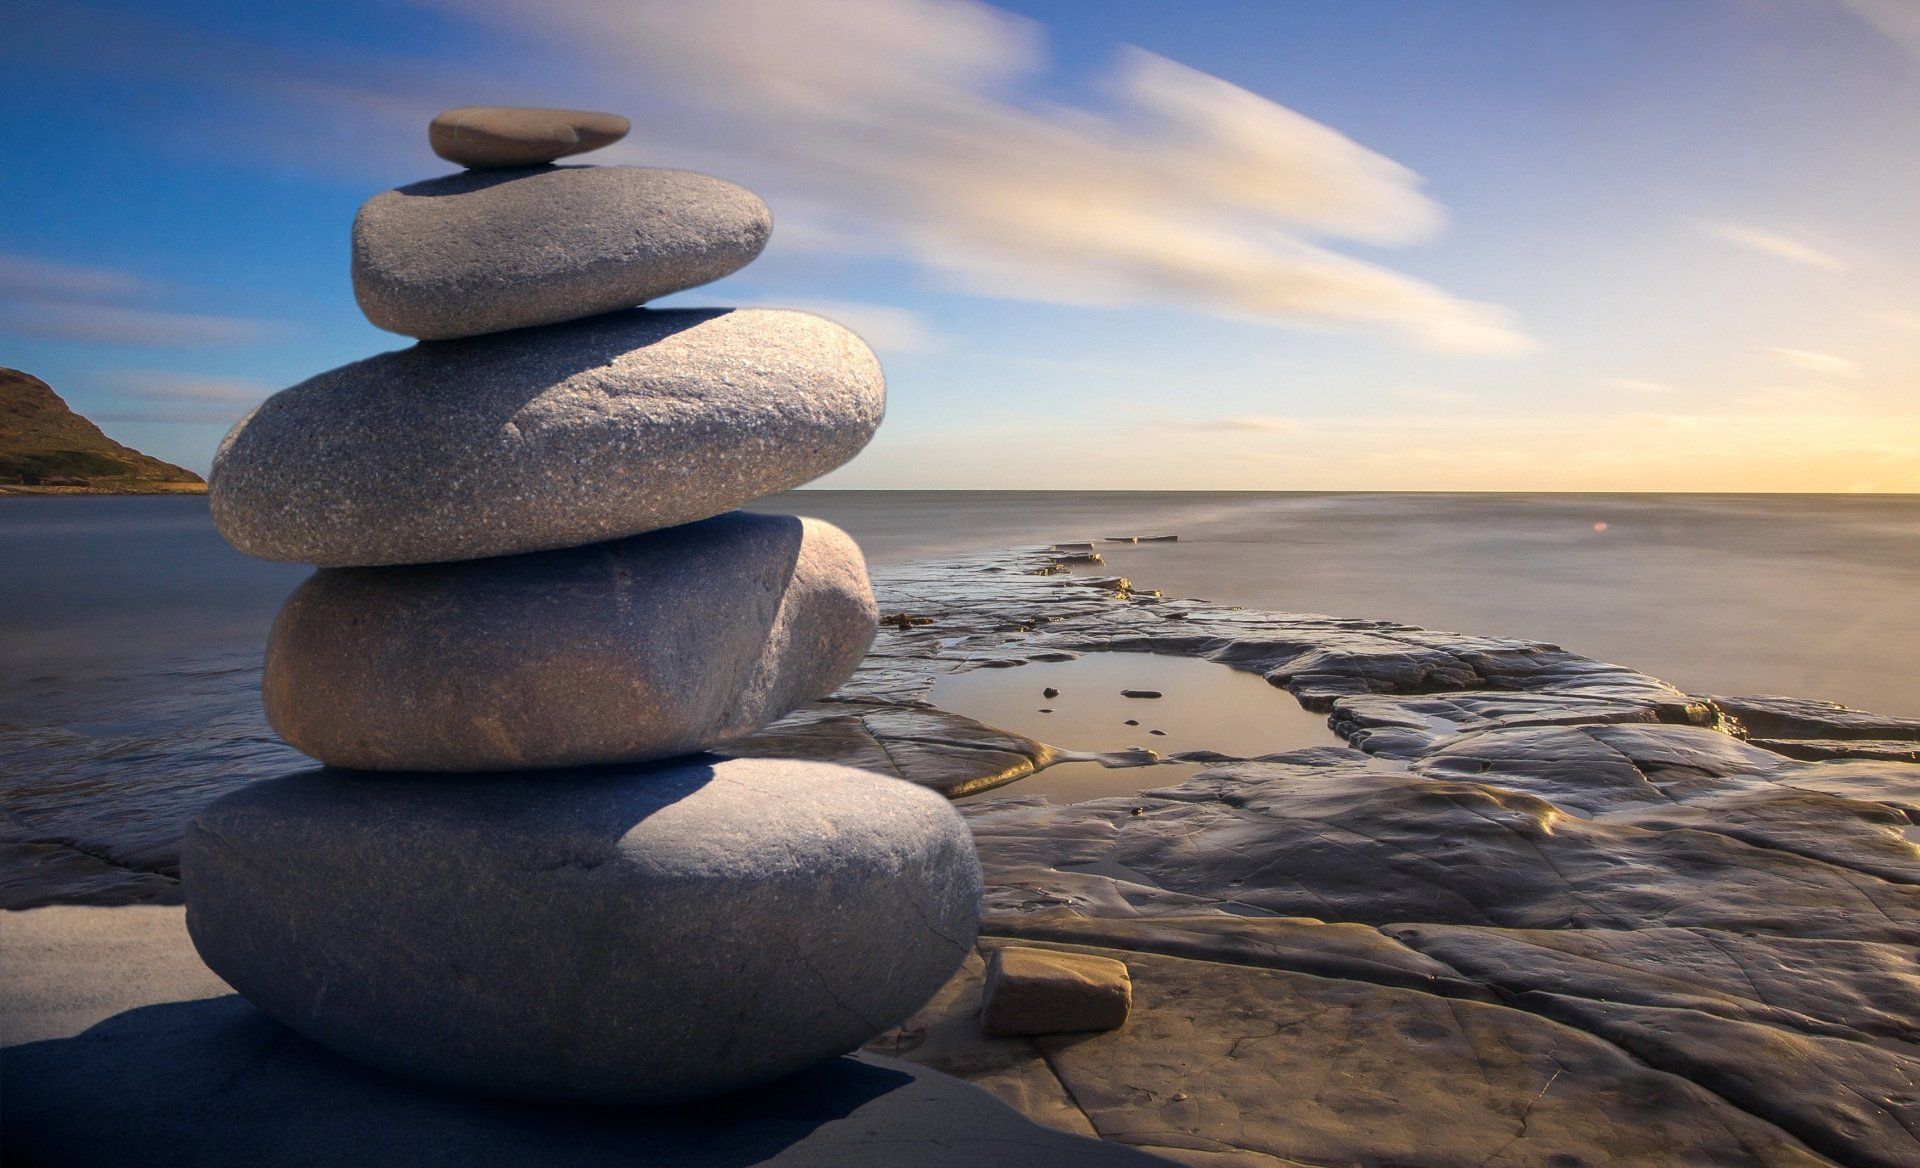 The image depicts a stacked rock Cairn, with five rocks arranged from largest at the bottom to smallest on the top, positioned on the edge of an ocean view. This image represents my virtual wellness program called SoulQuest online. SoulQuest offers various levels of spiritual guidance focused on three key aspects: purpose, mindfulness, and connection. The program aims to collaborate with clients in envisioning their greater life purpose and providing them with practical tools and methods to cultivate awareness, enlightenment, and meaningful experiences.